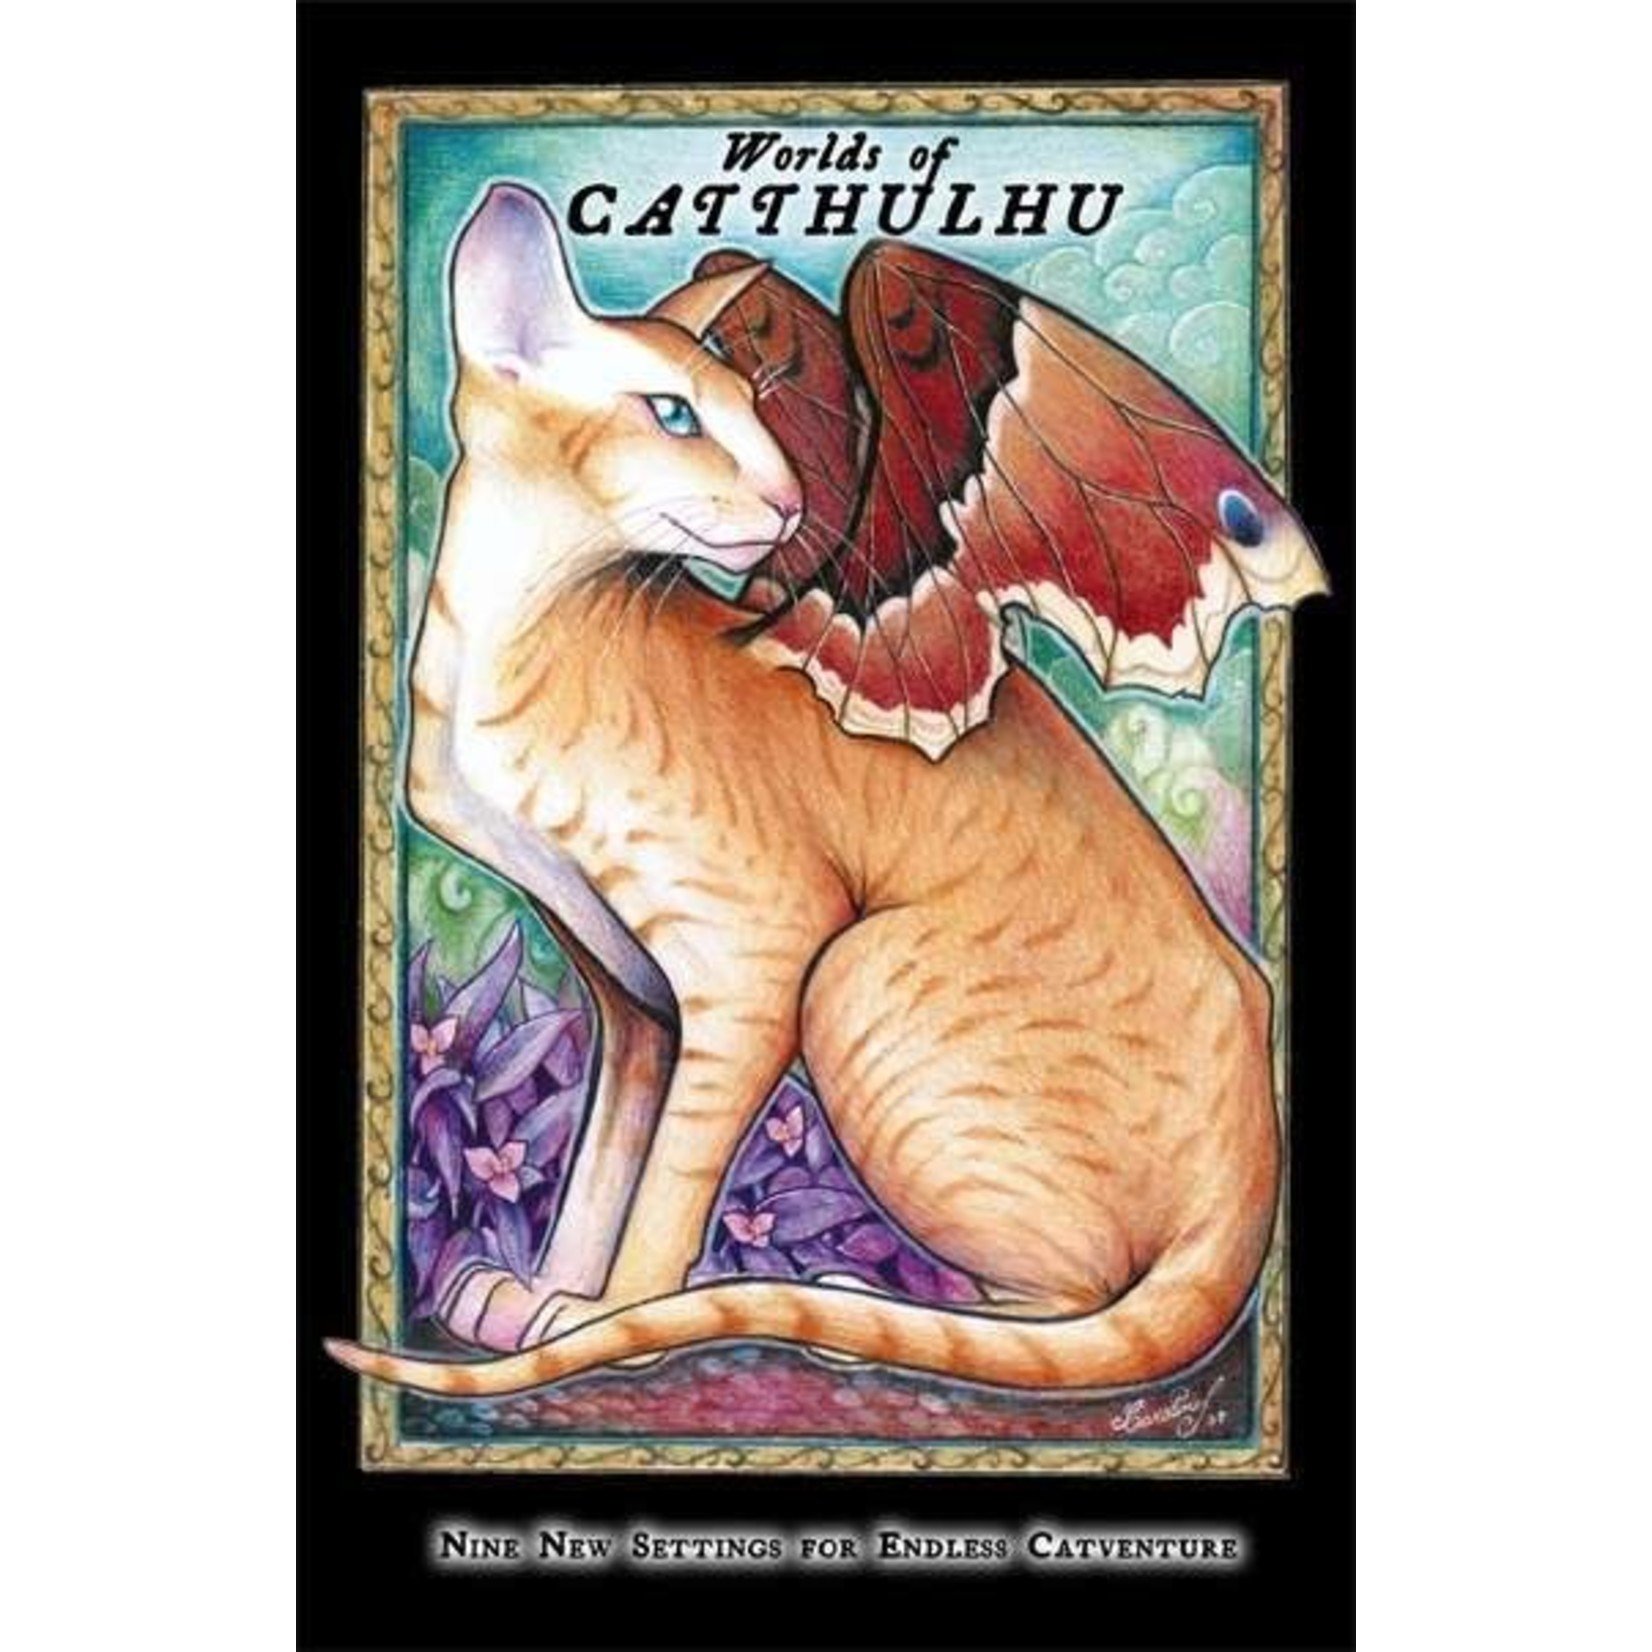 Joel Sparks Cats of Catthulhu: Worlds of Catthulhu (Book III)